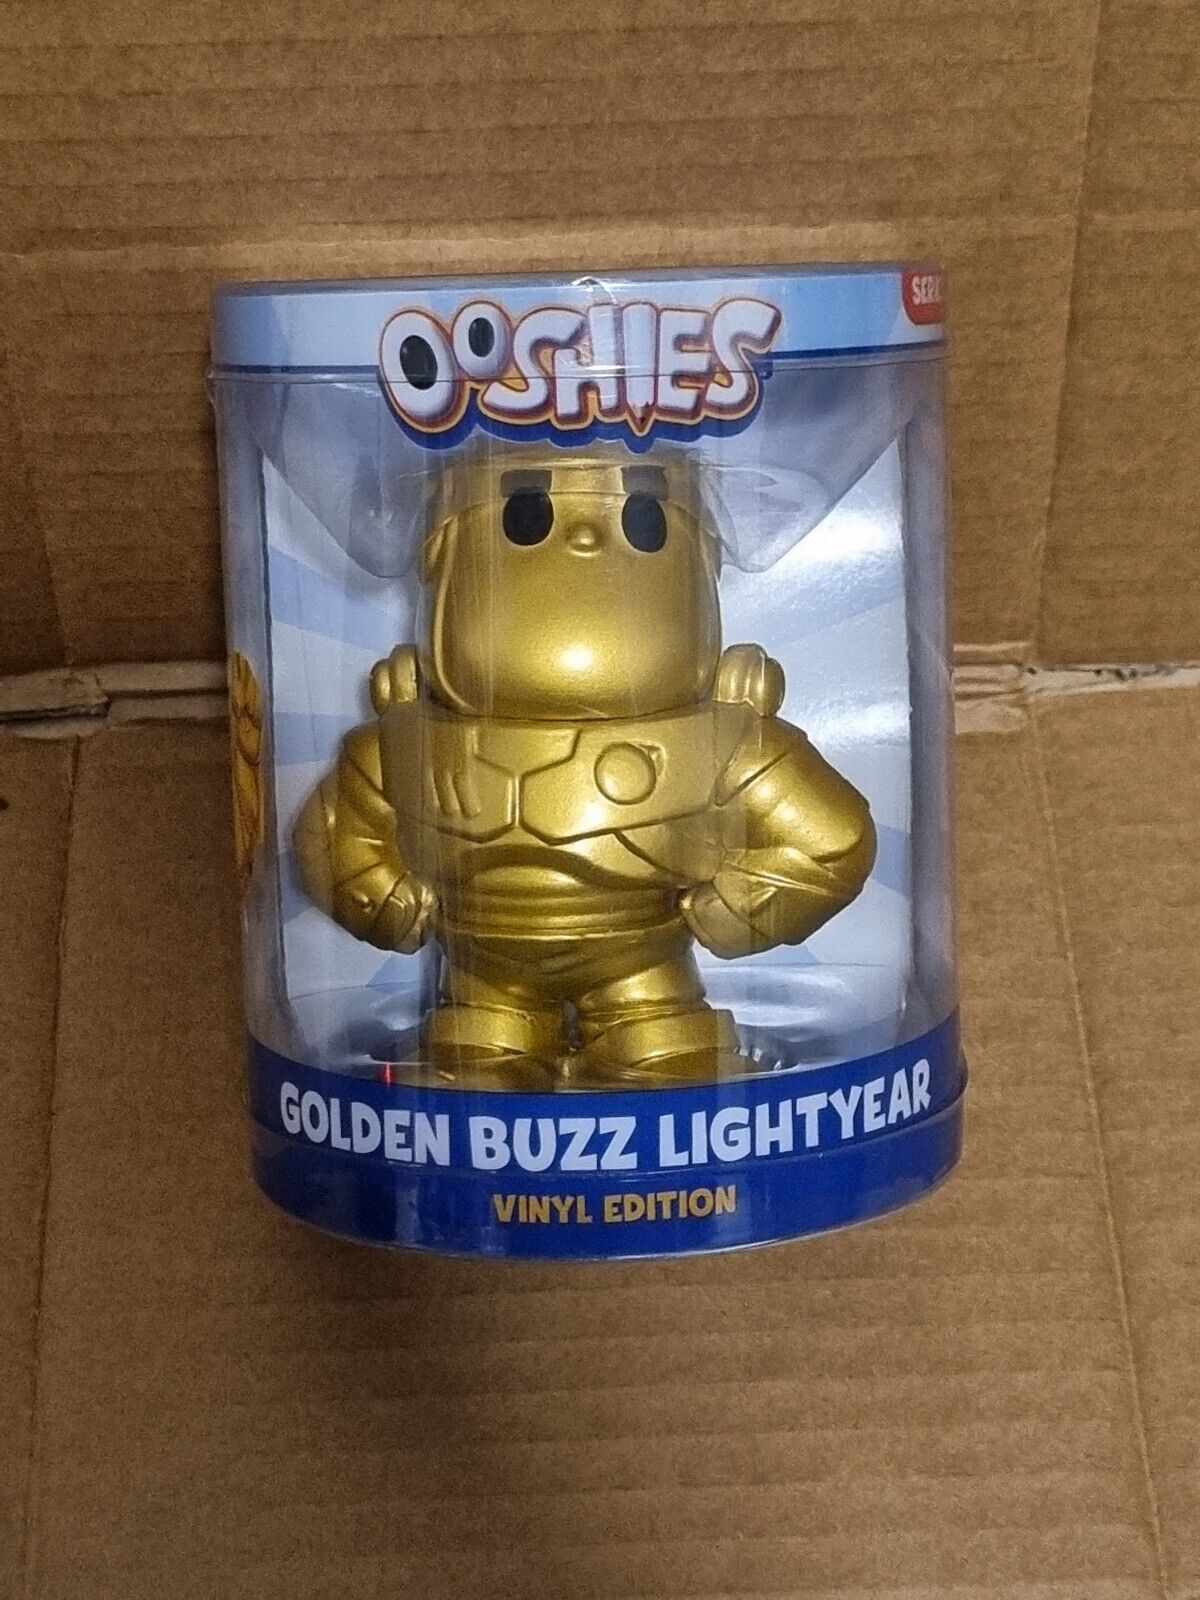 GOLDEN BUZZ LIGHTYEAR OOSHIES VINYL EDITION CHASE Ooshie GOLD